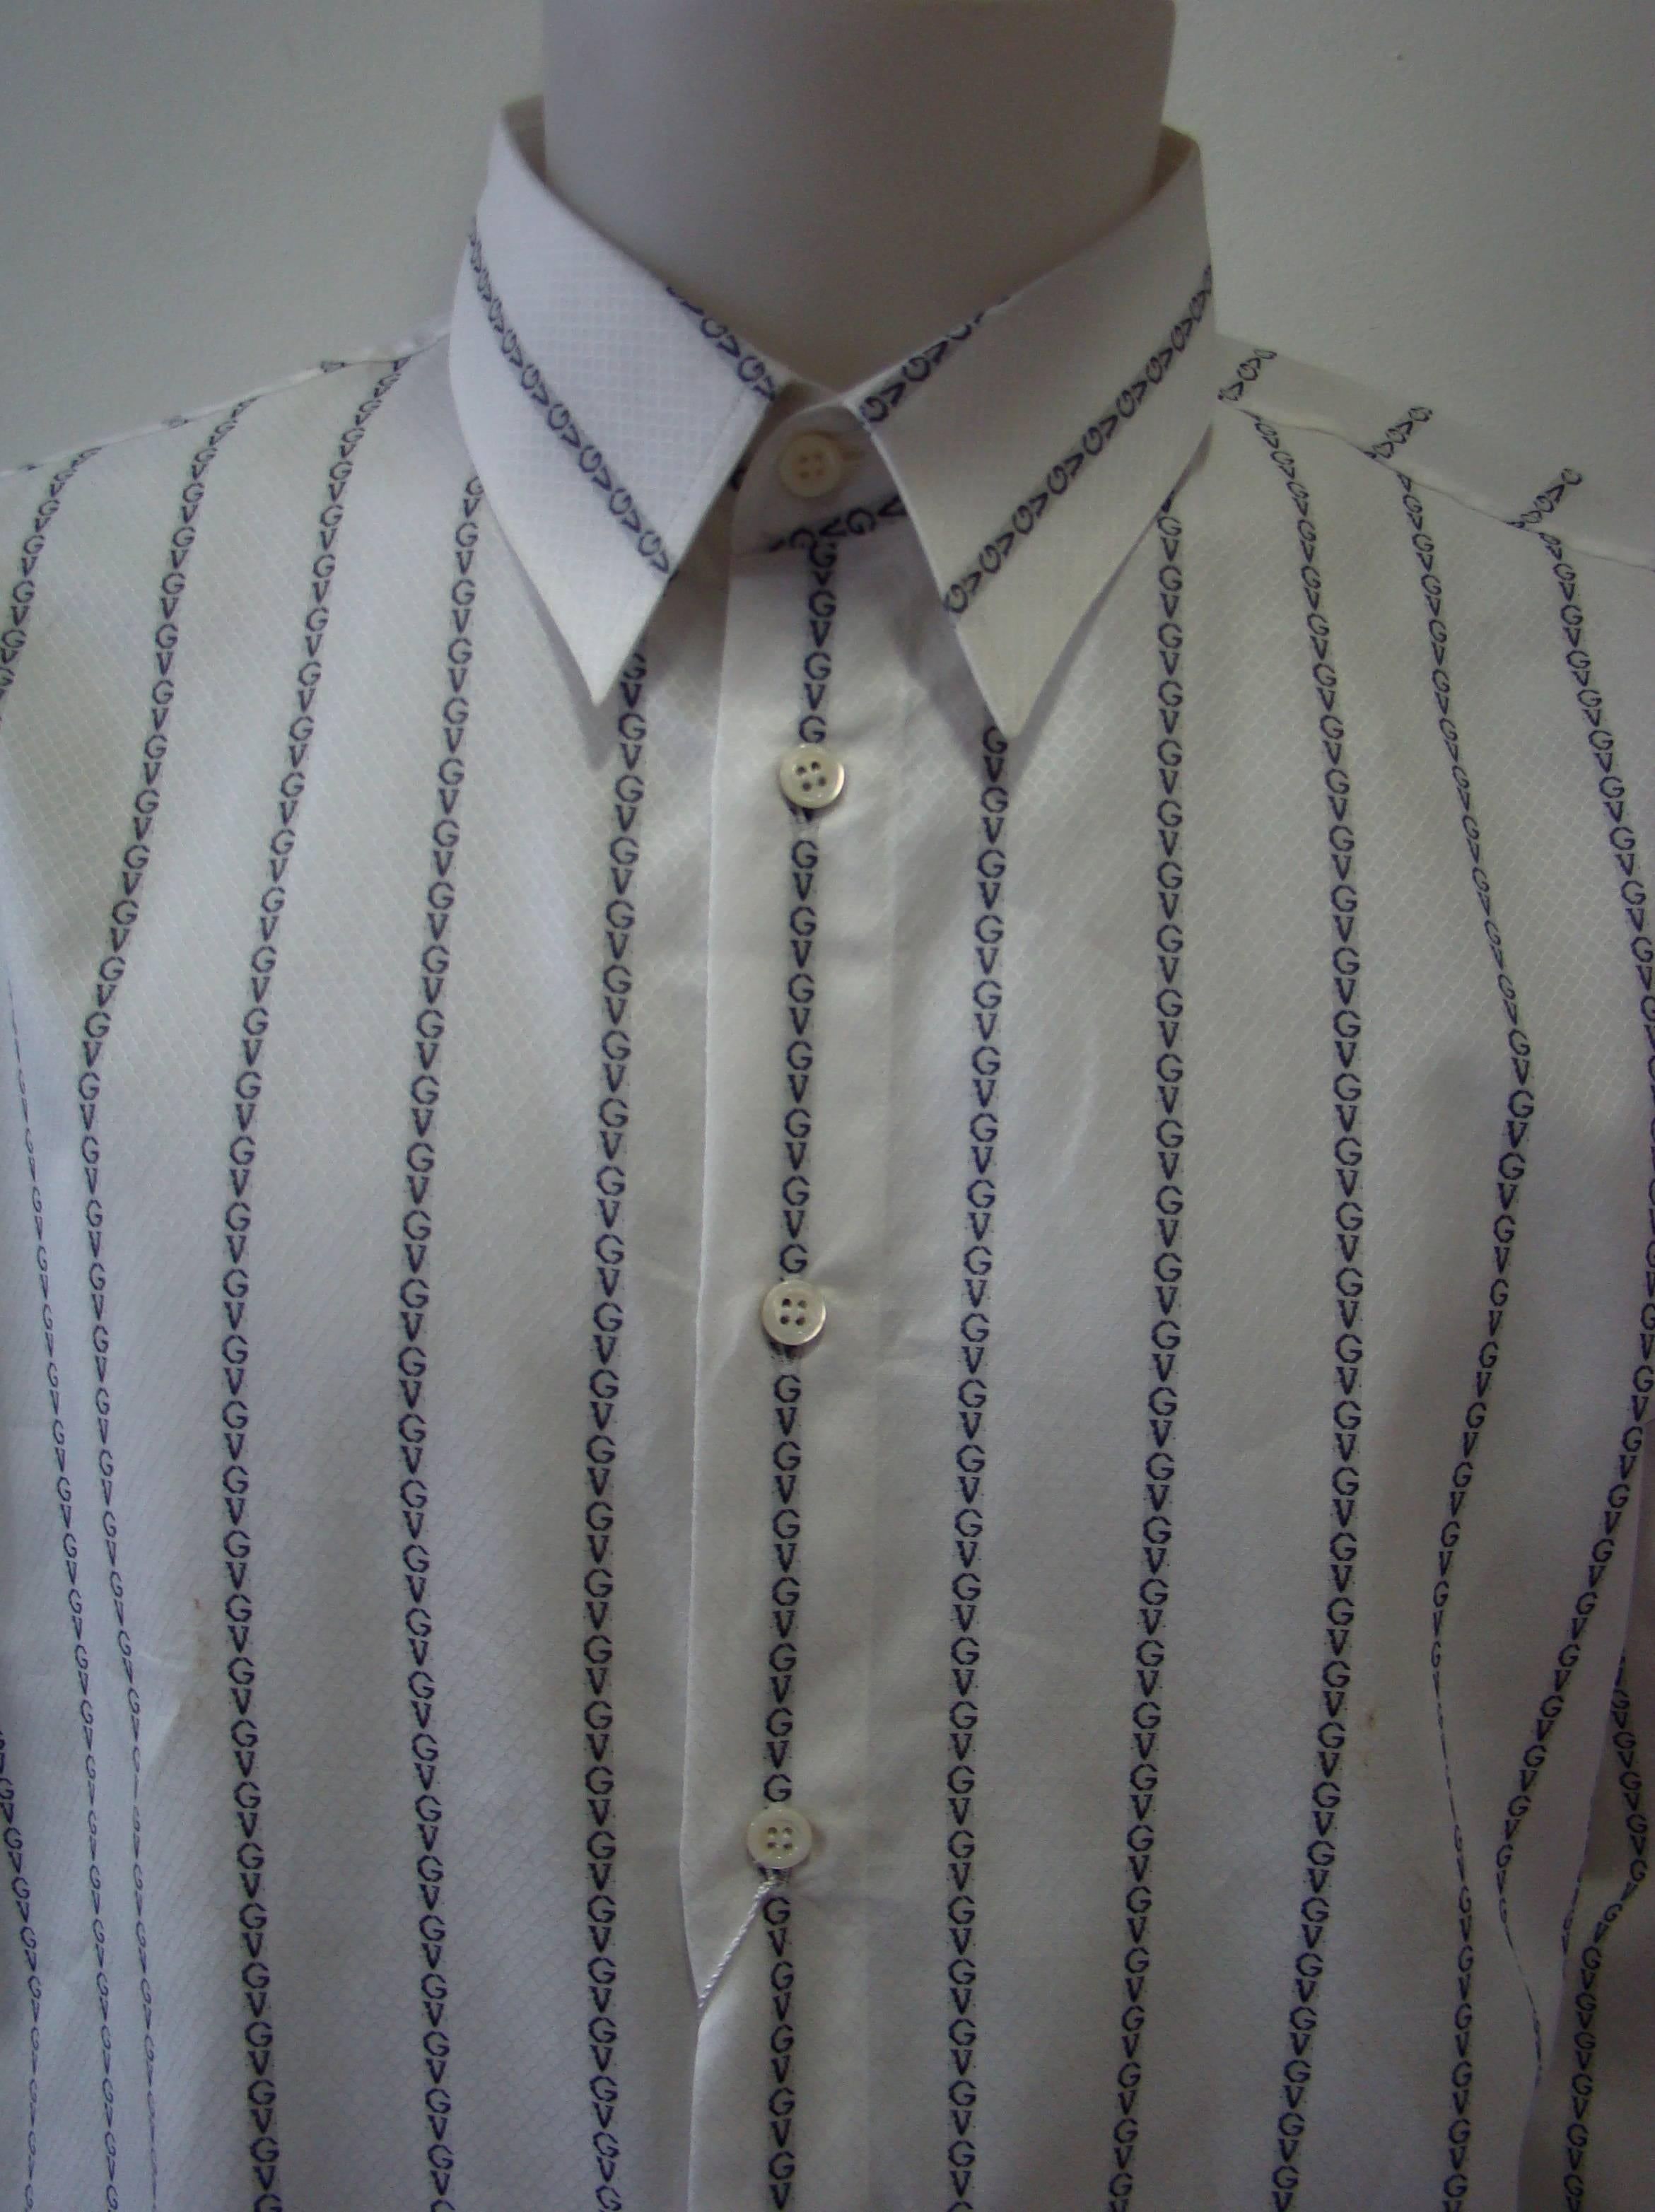 Gianni Versace Striped With Initials Printed Shirt In New Condition For Sale In Athens, Agia Paraskevi